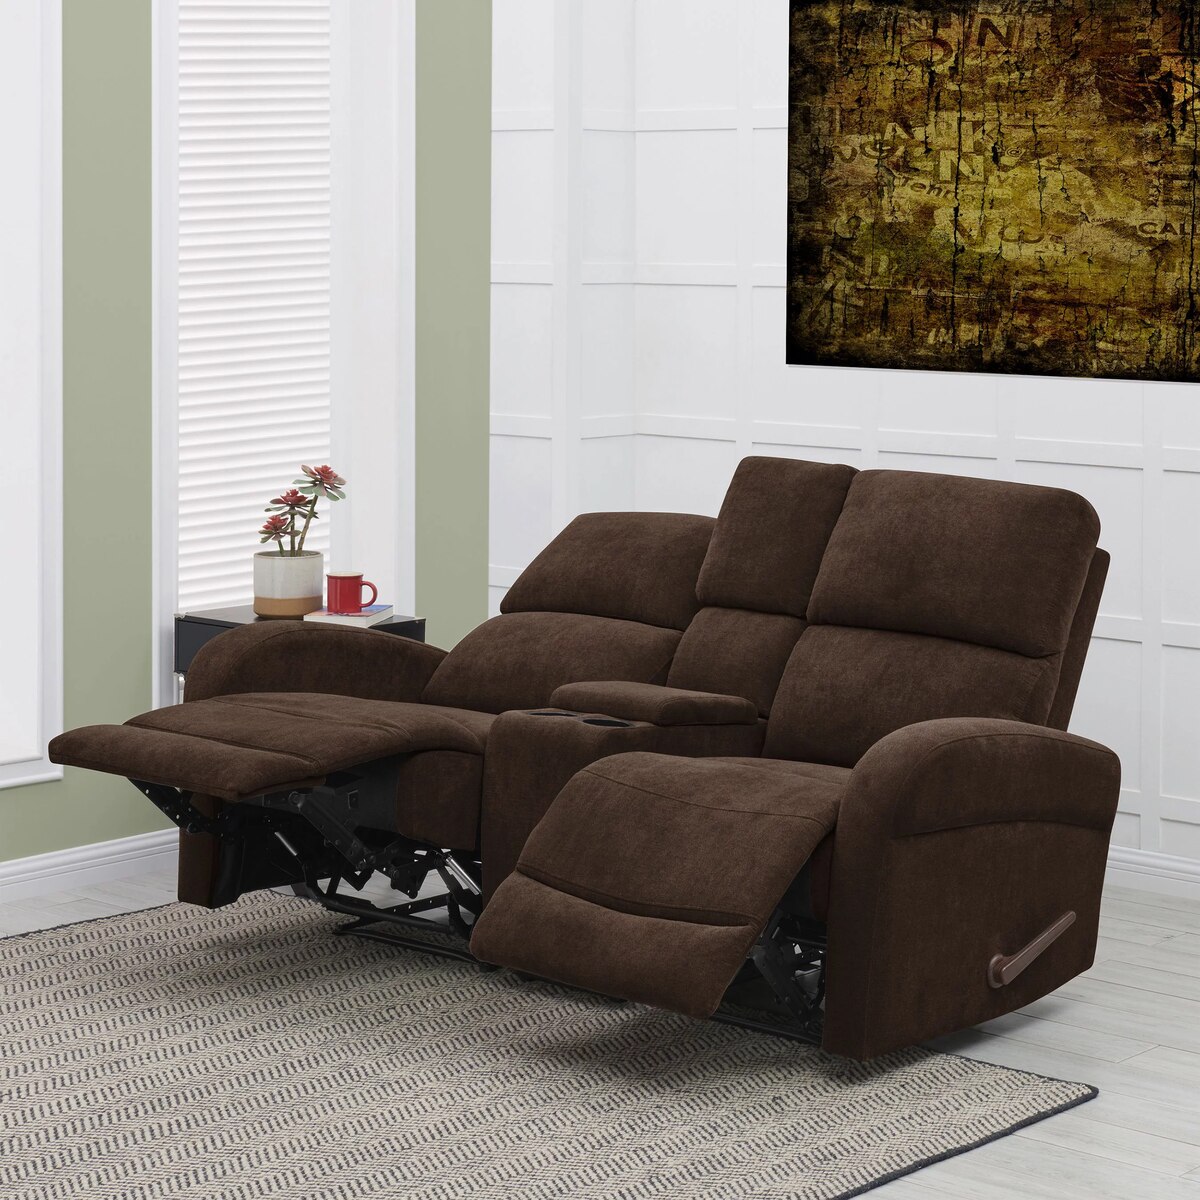 What Does Wall Hugger Recliner Mean